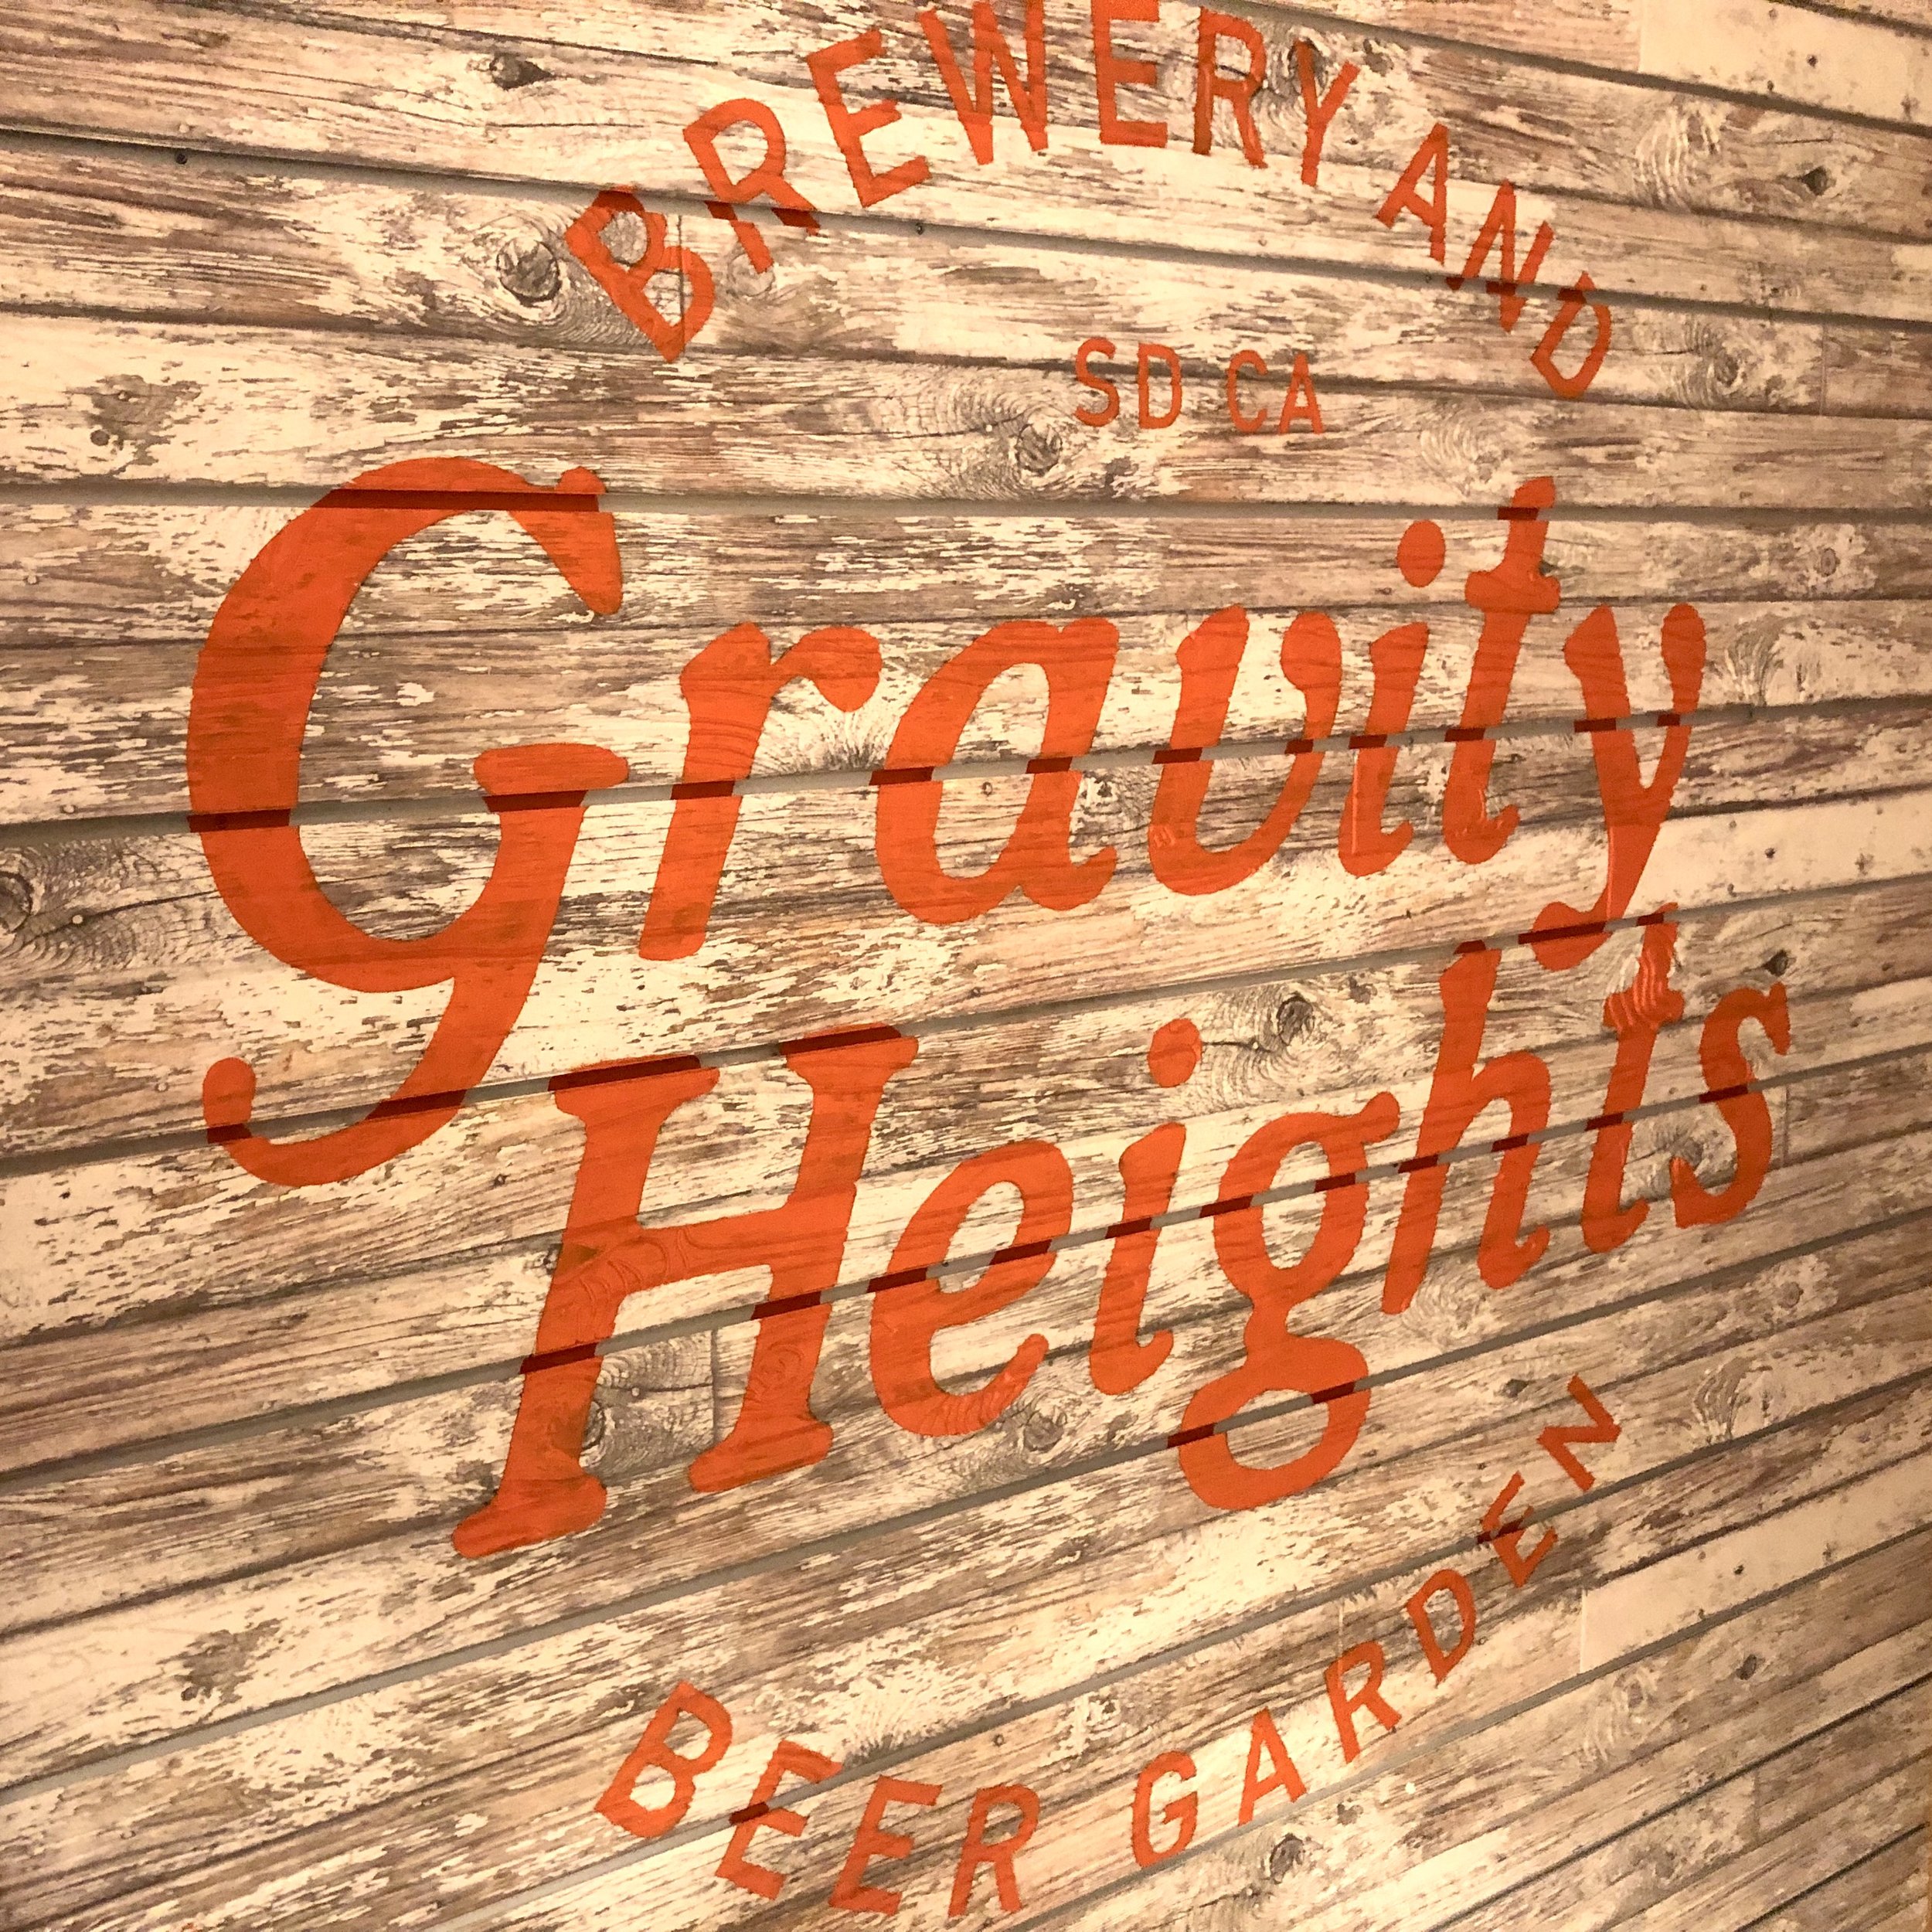 Gravity Heights Brewery San Diego hand painted branding wall graphic mural